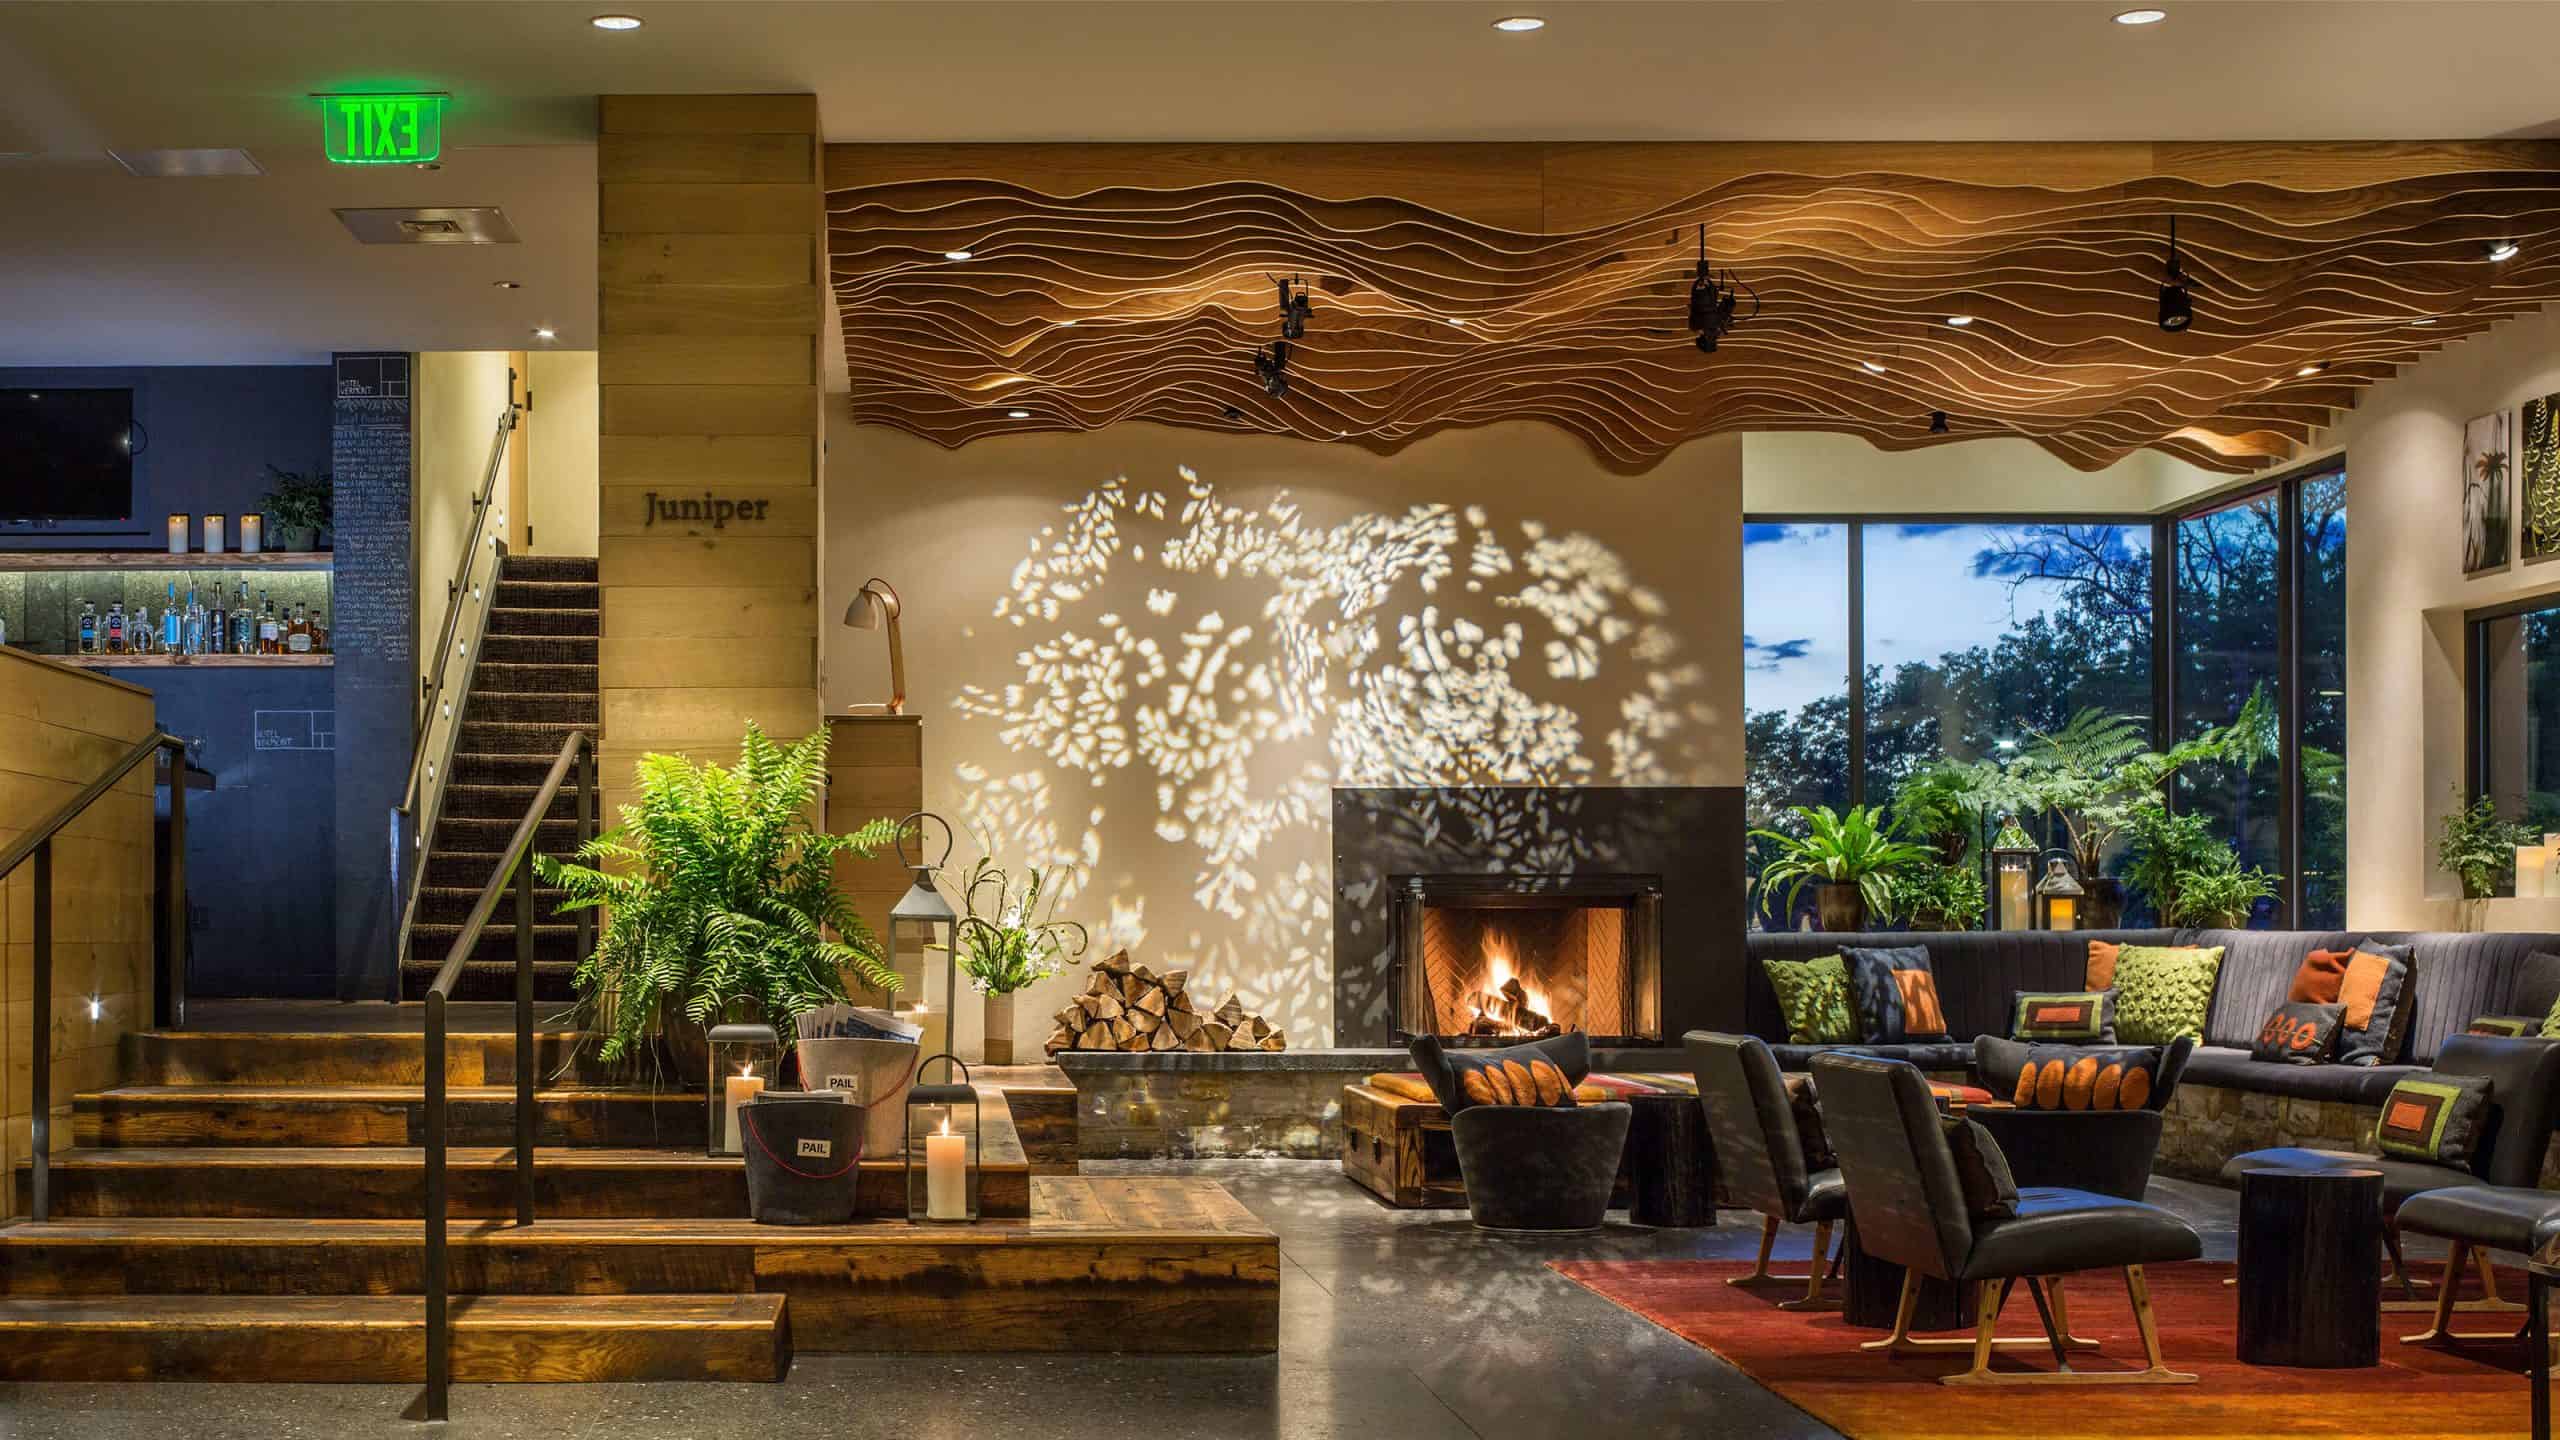 Hotel Vermont - Lobby with Fireplace and Stairs to Juniper